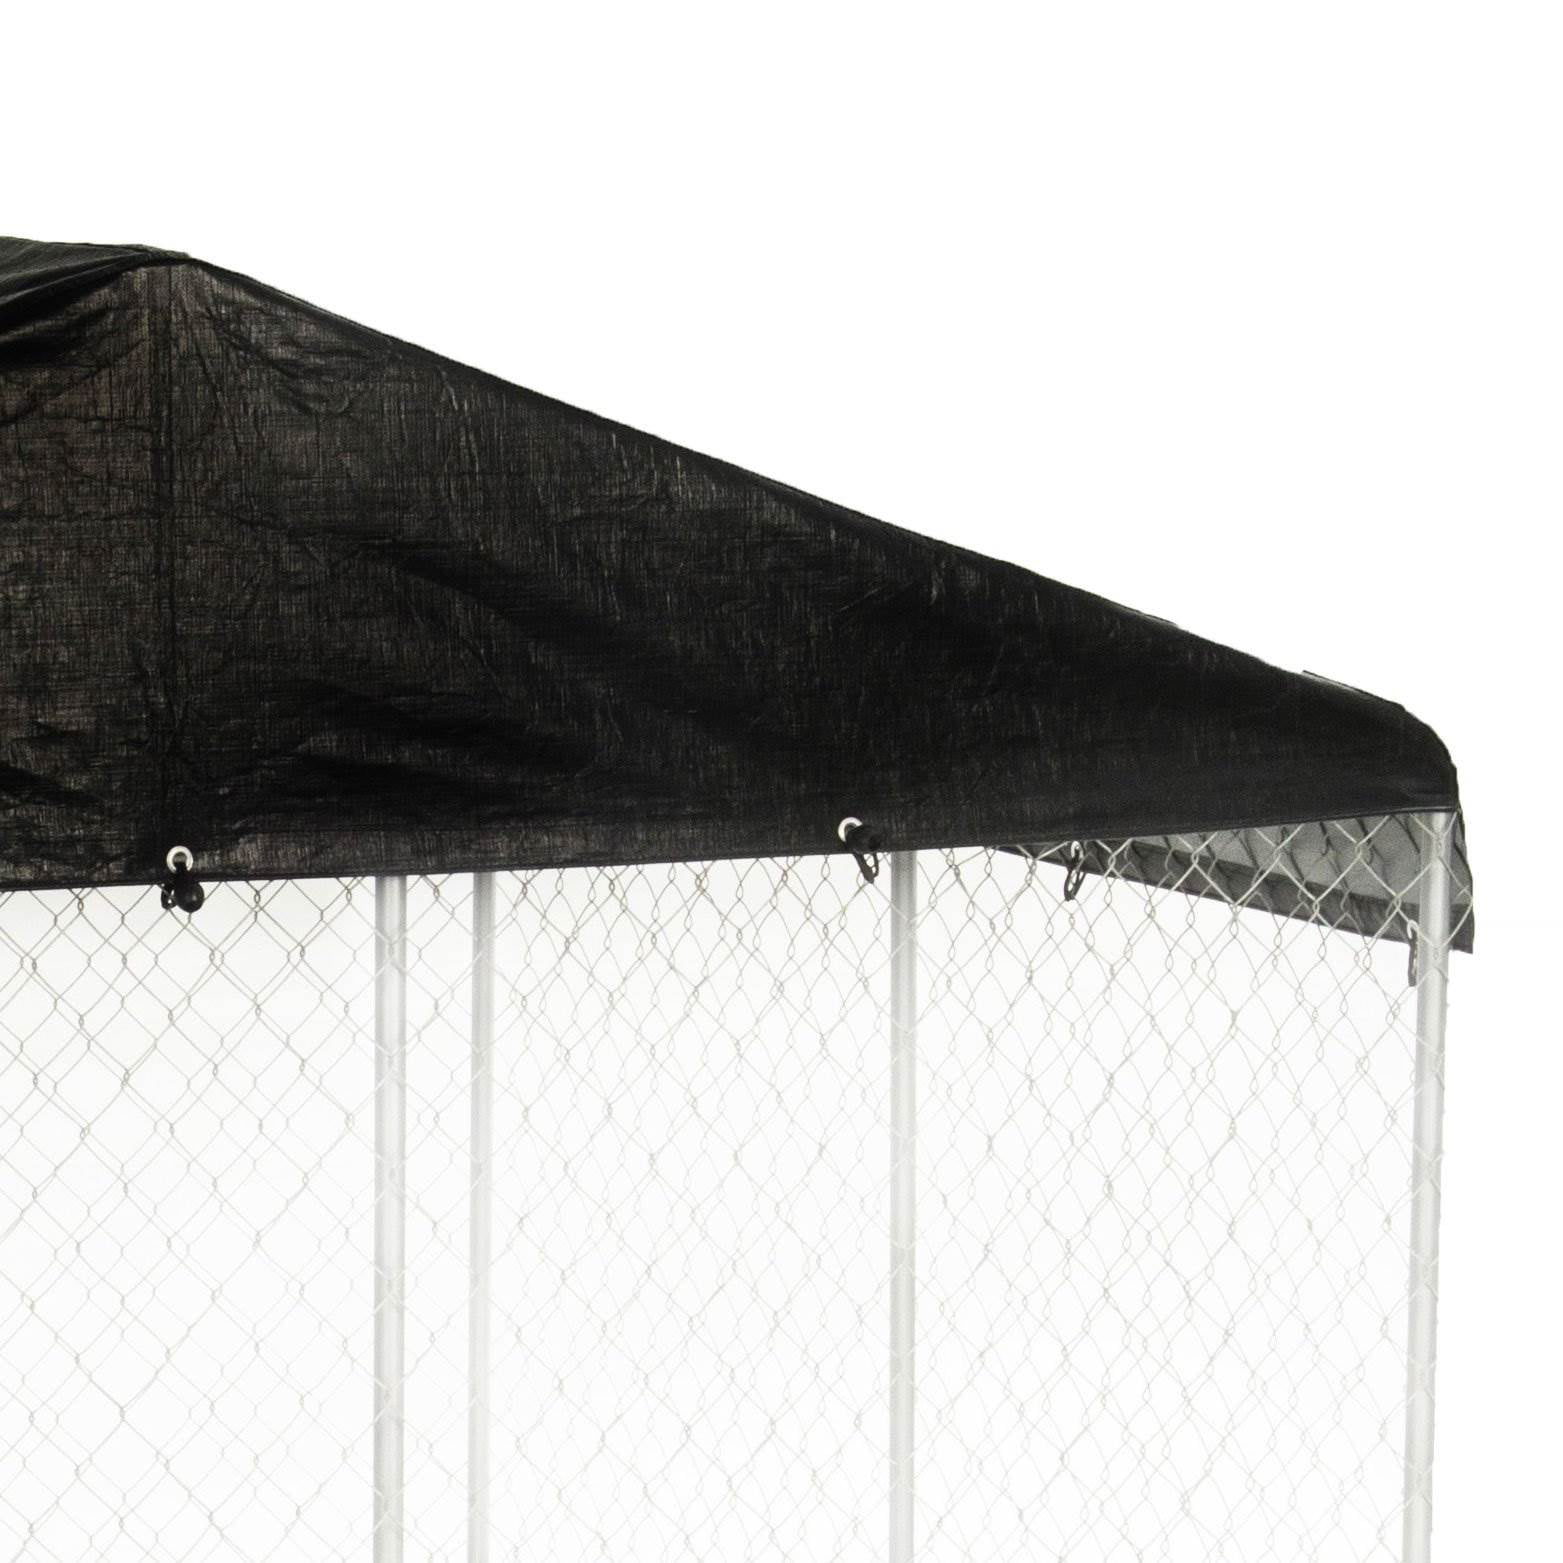 WeatherGuard 10' x 10' Dog Run Kennel Enclosure Waterproof Roof Cover (2 Pack)